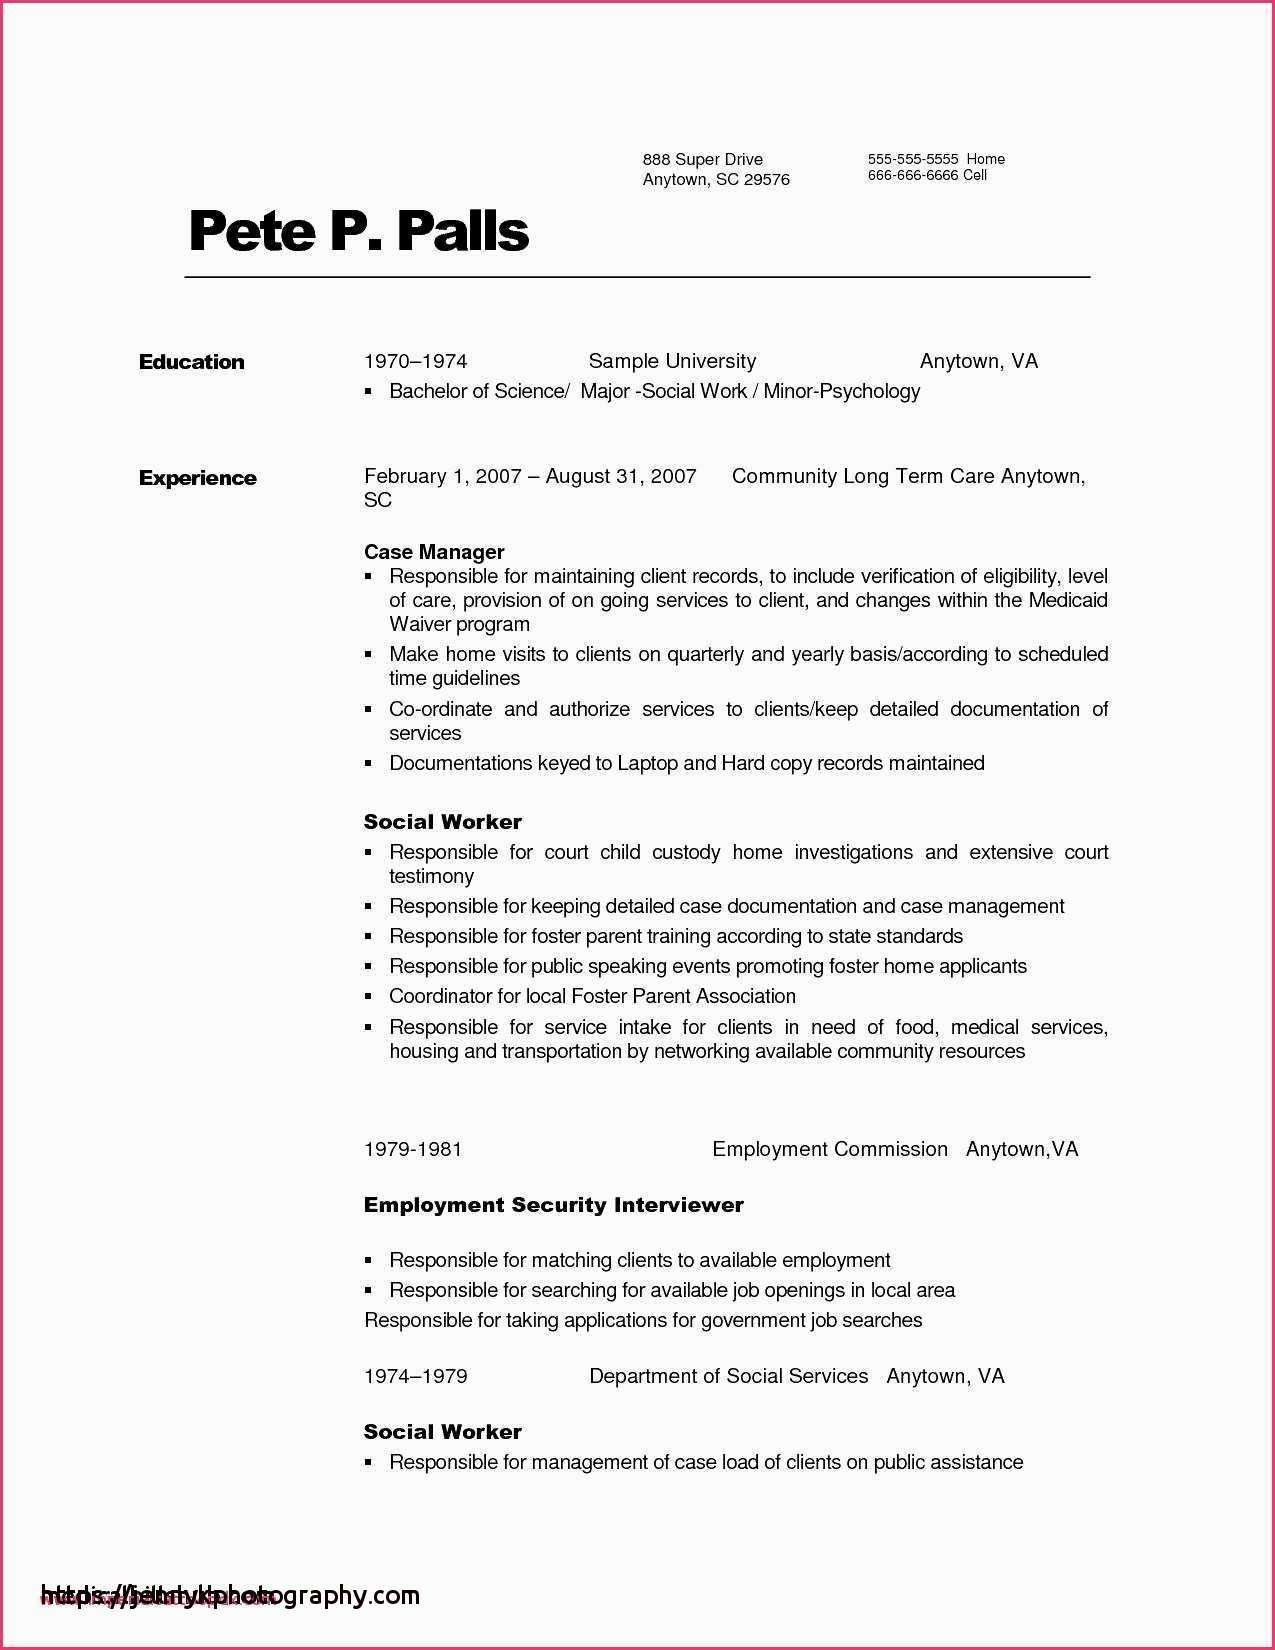 Resume Sample for A Long Term Employee Caregiver Resume Sample for Elderly – Good Resume Examples